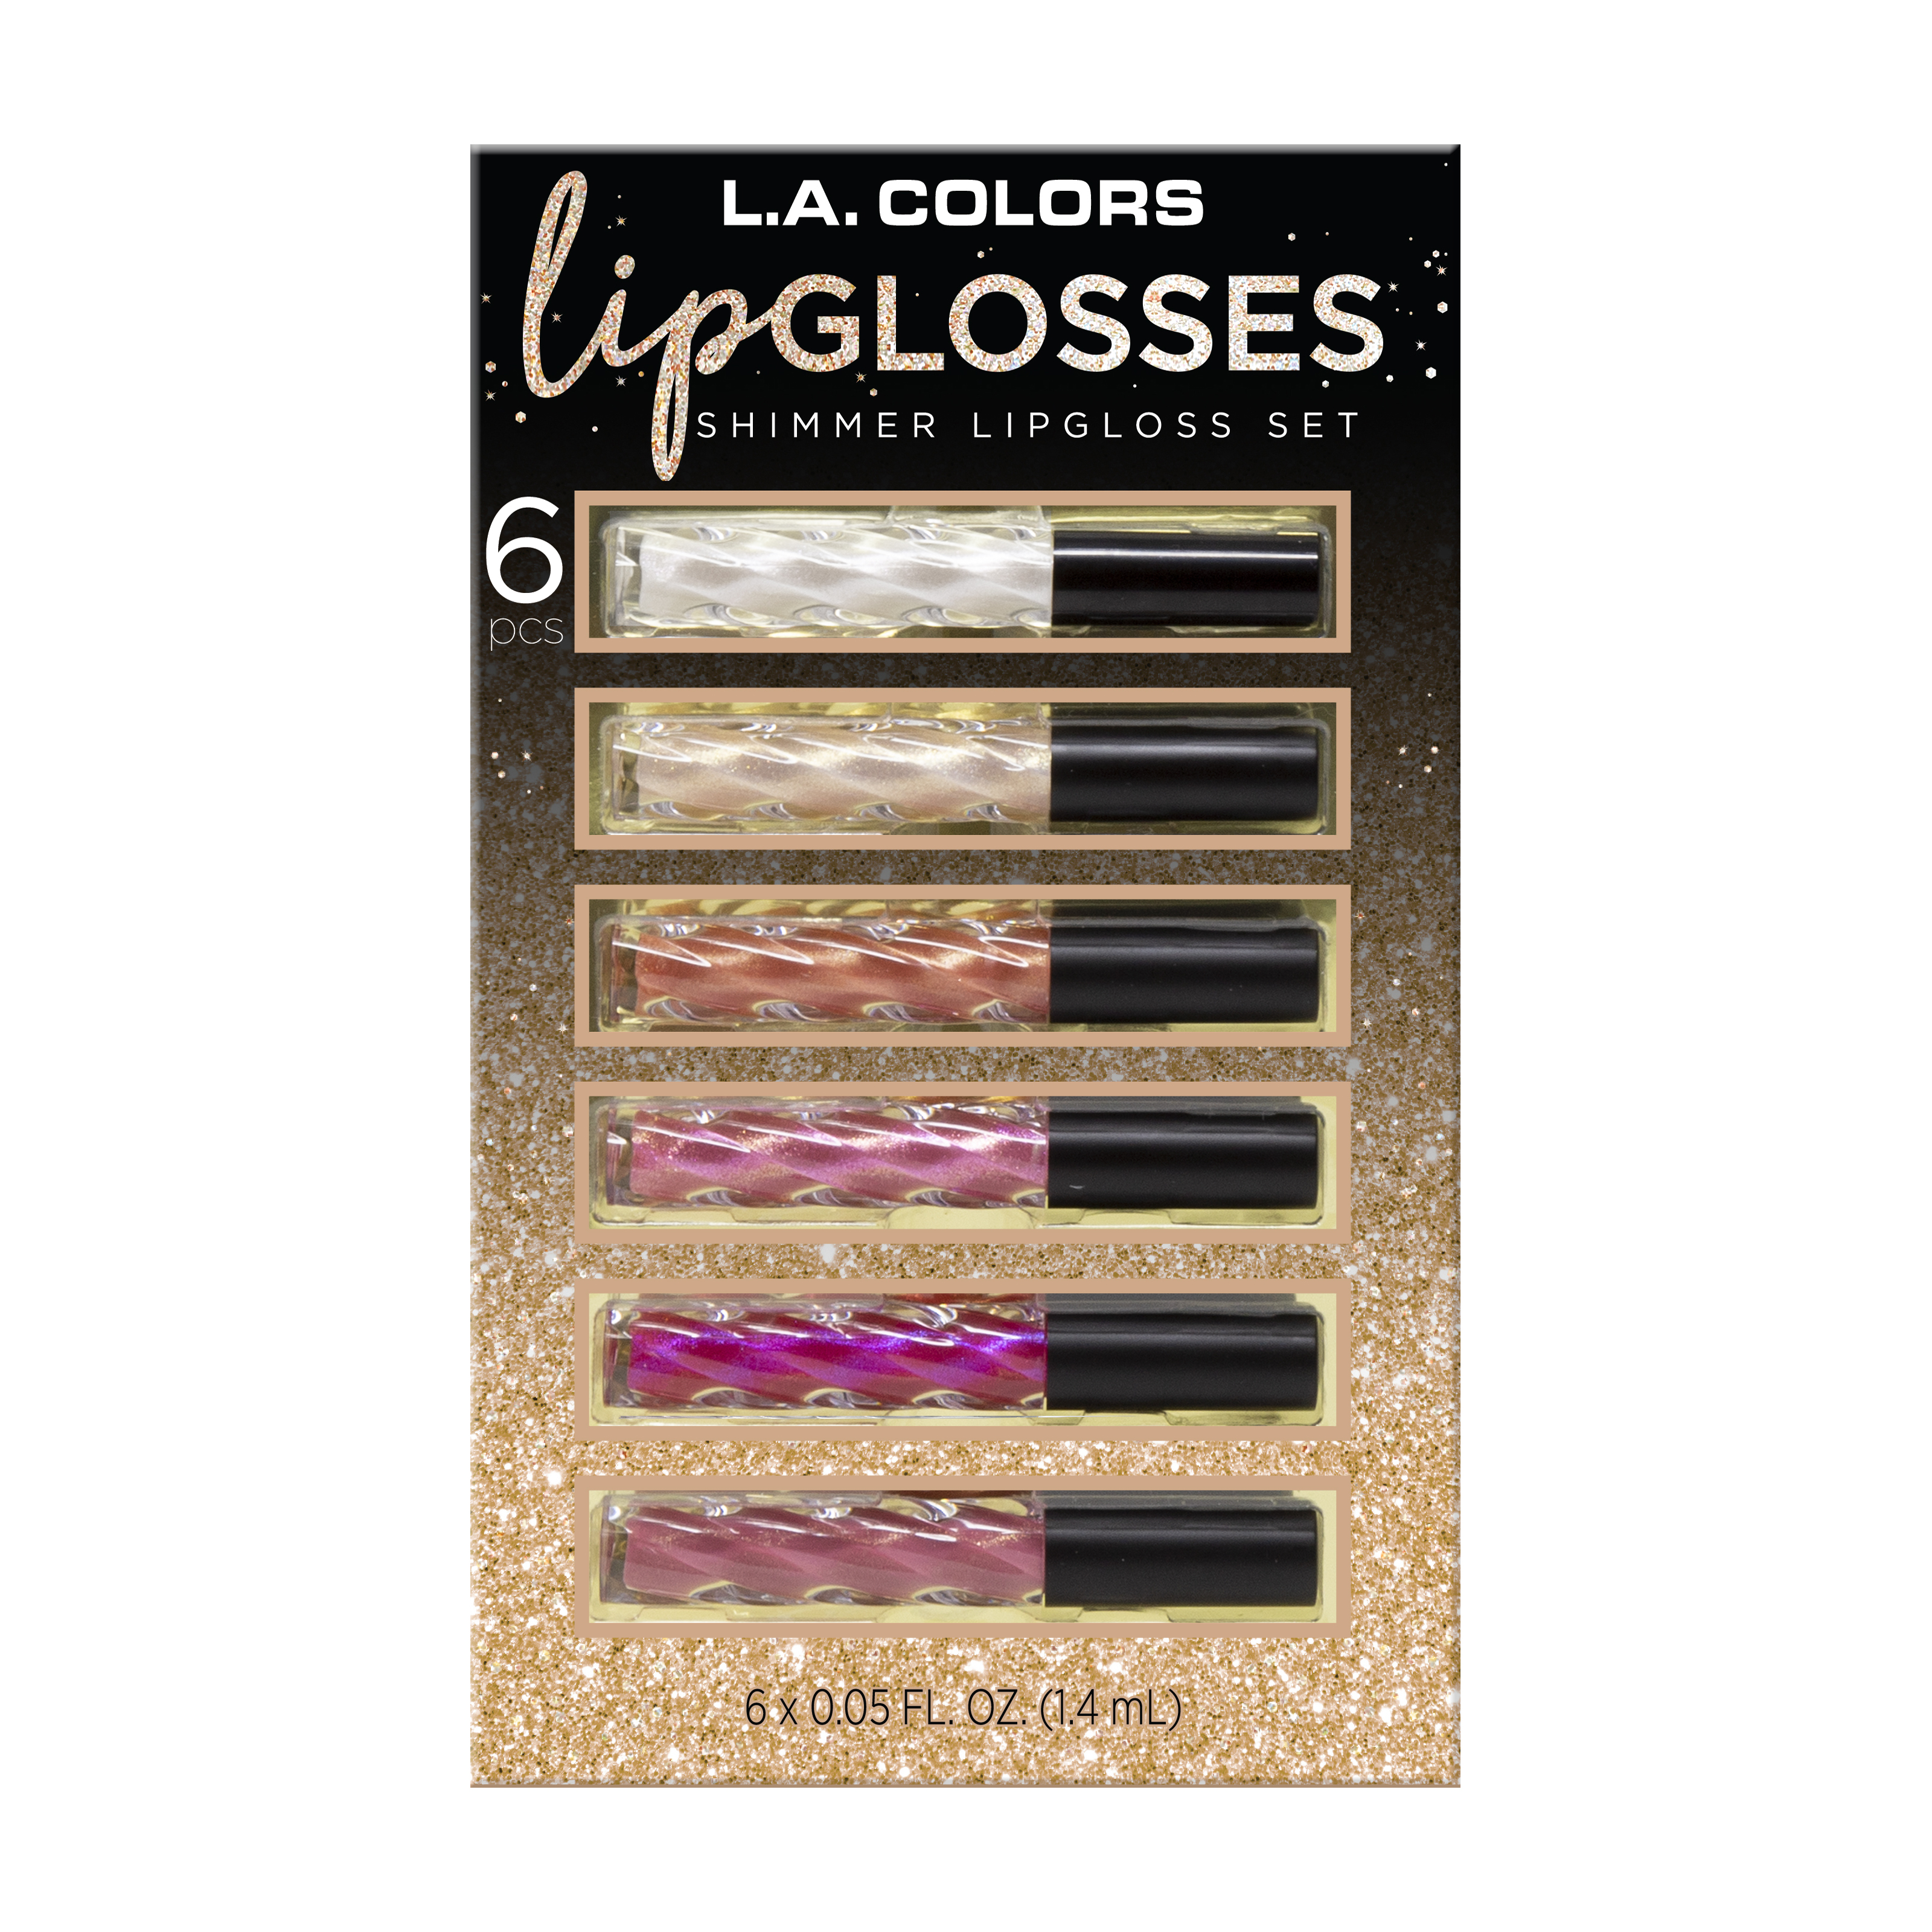 ($15 Value) L.A. Colors Shimmer Gift Set Lip Glosses, Shimmer Finish, 6 Piece - image 1 of 7